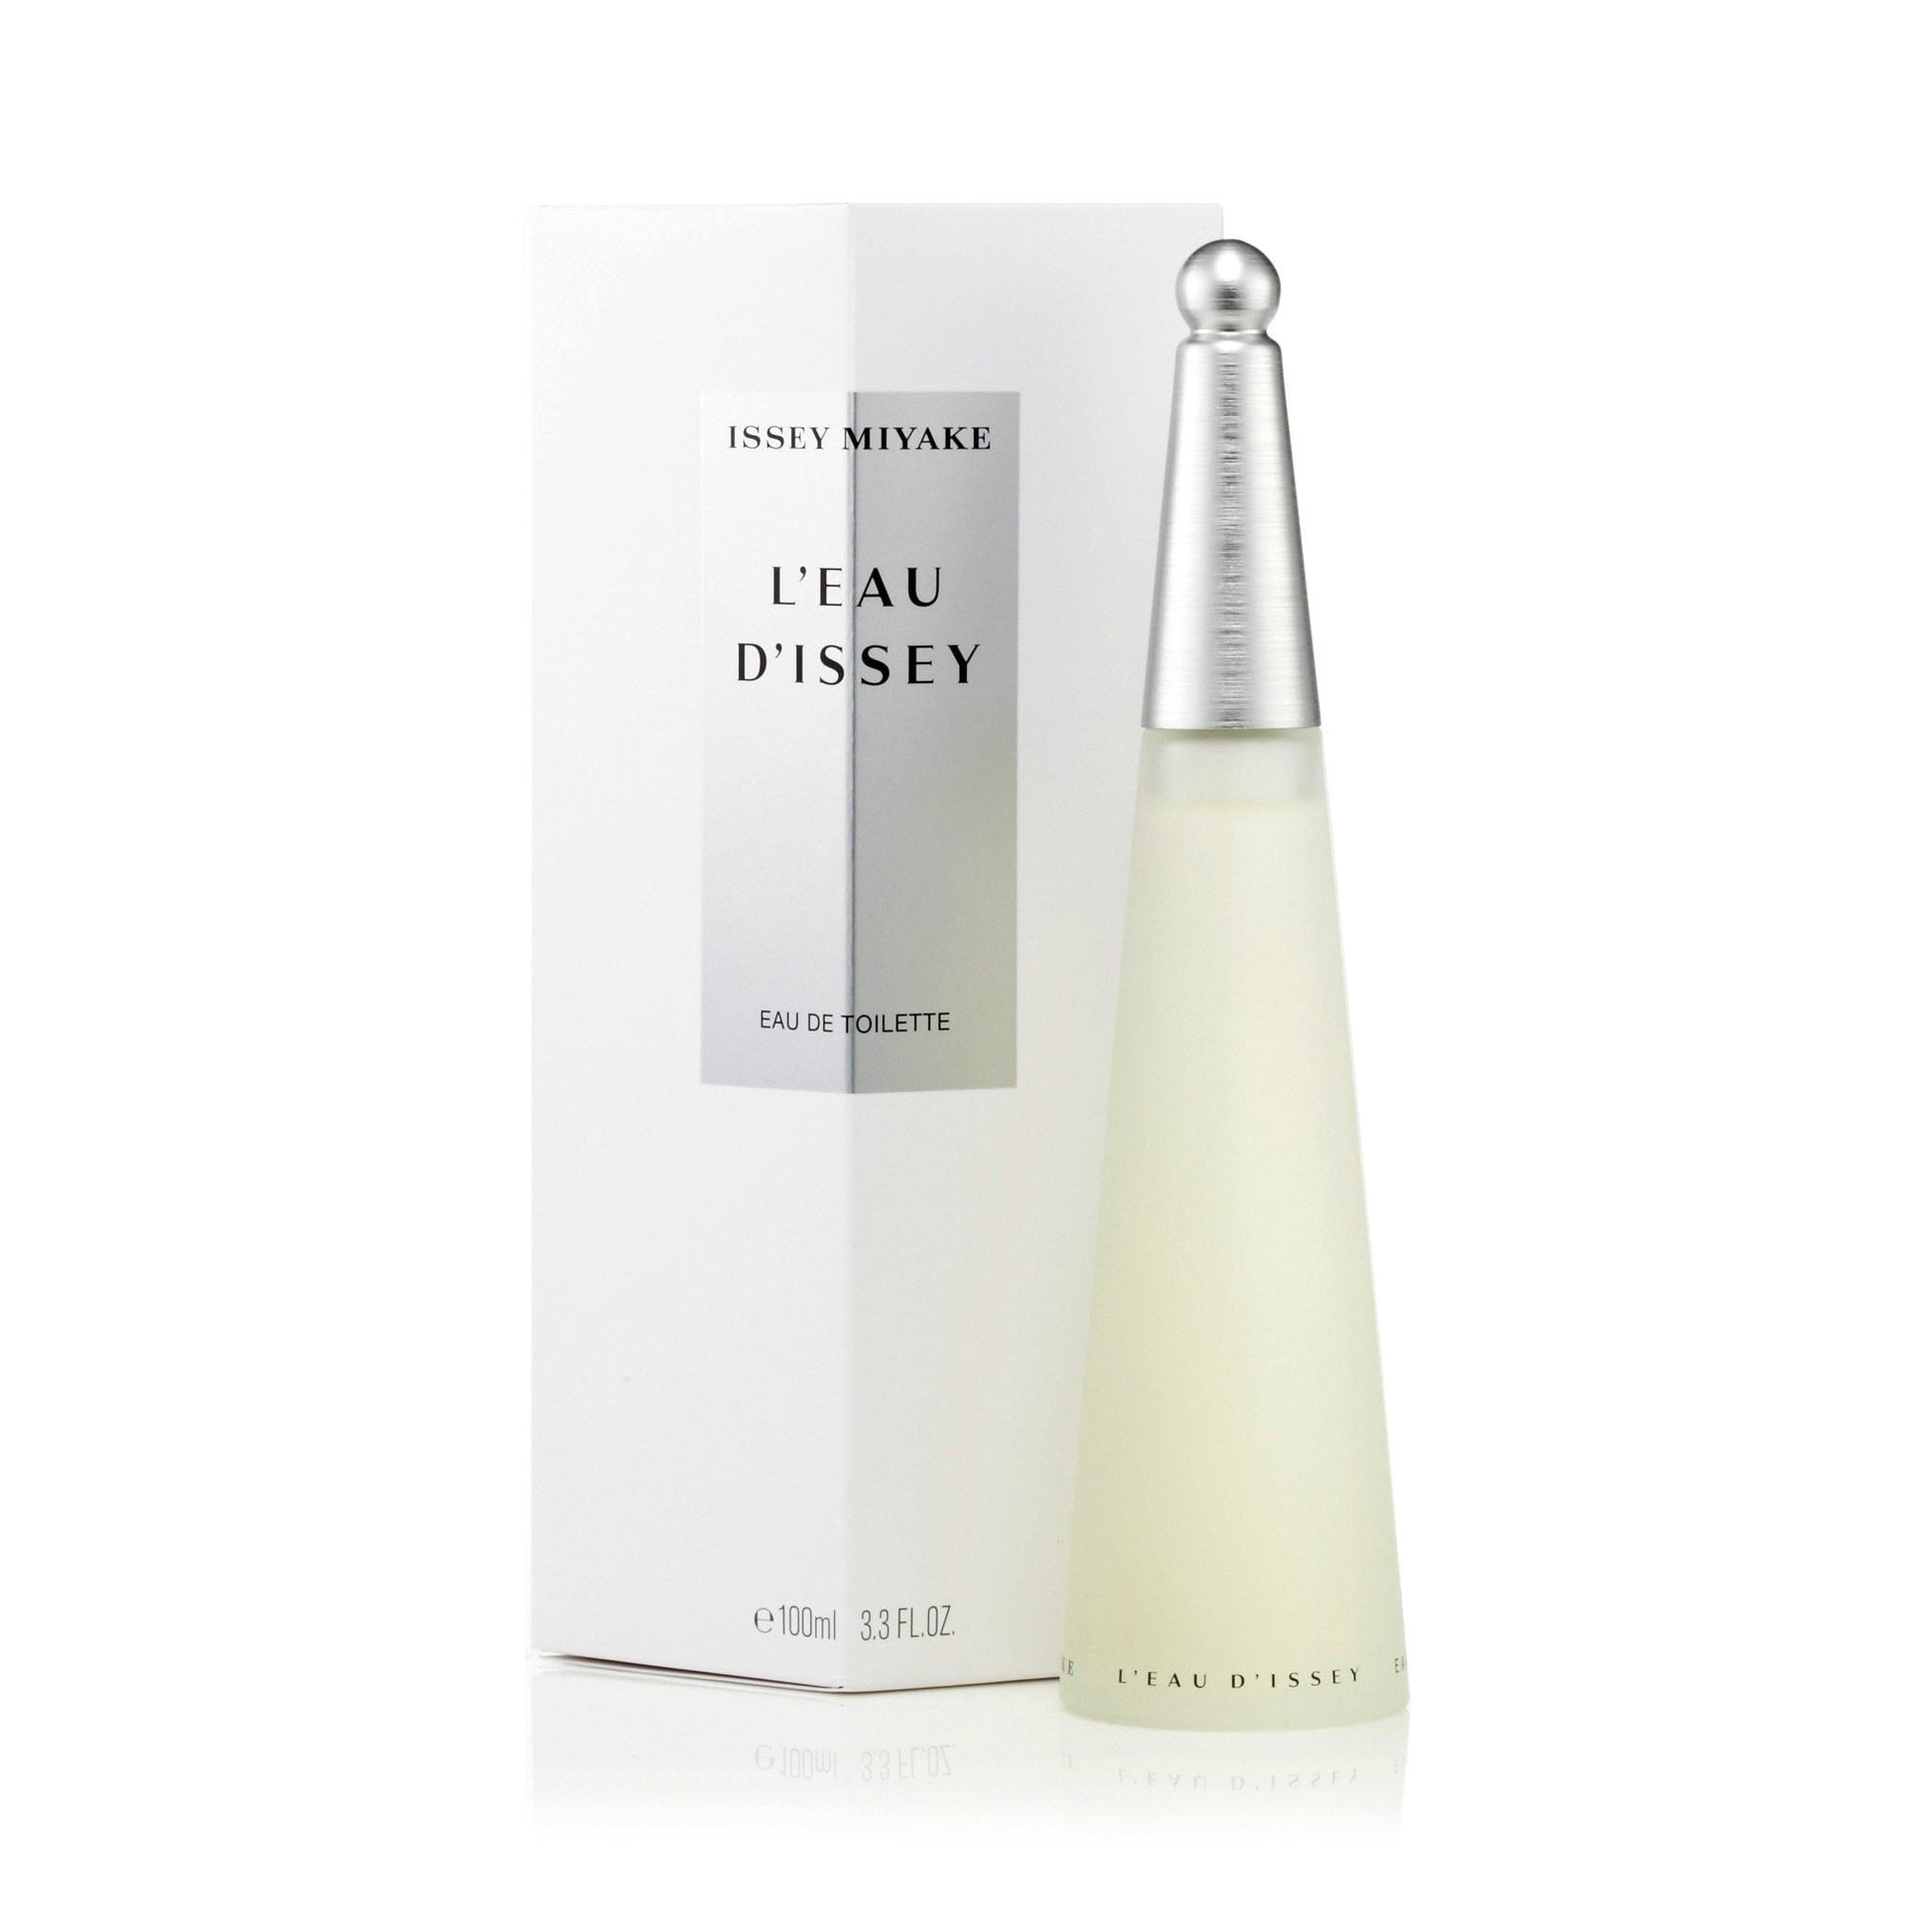 L'Eau Dissey Eau de Toilette Spray for Women by Issey Miyake, Product image 1